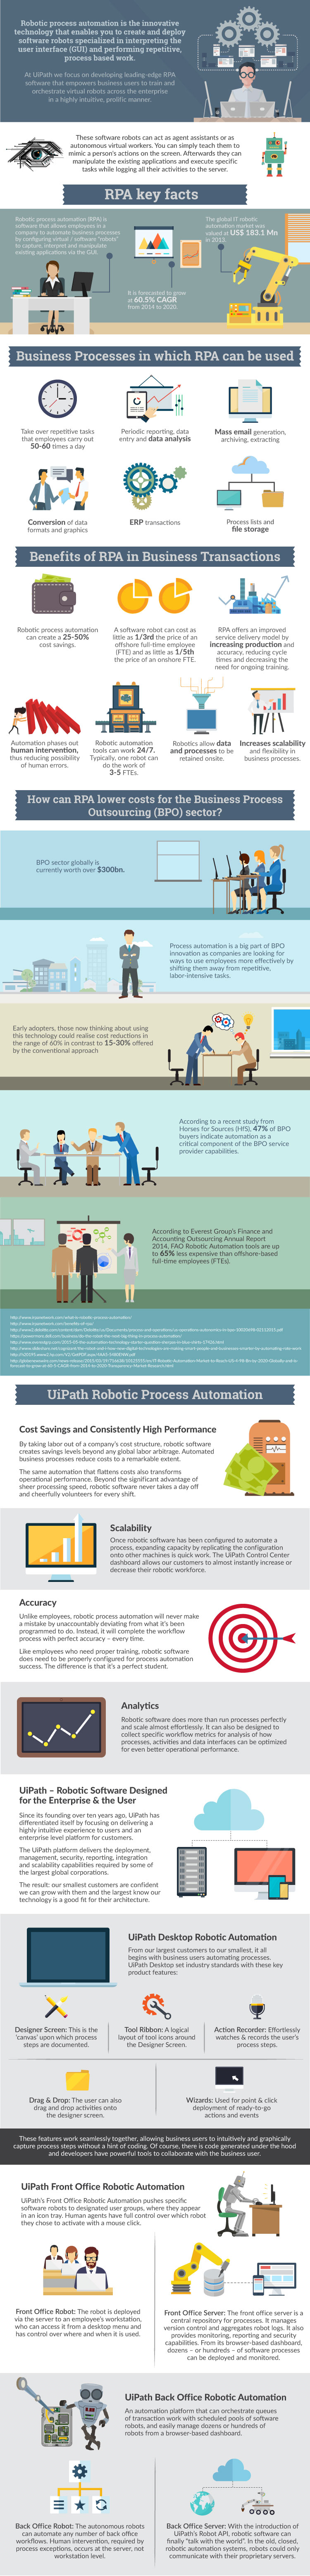 The-Robotic-Process-Automation-Infographic